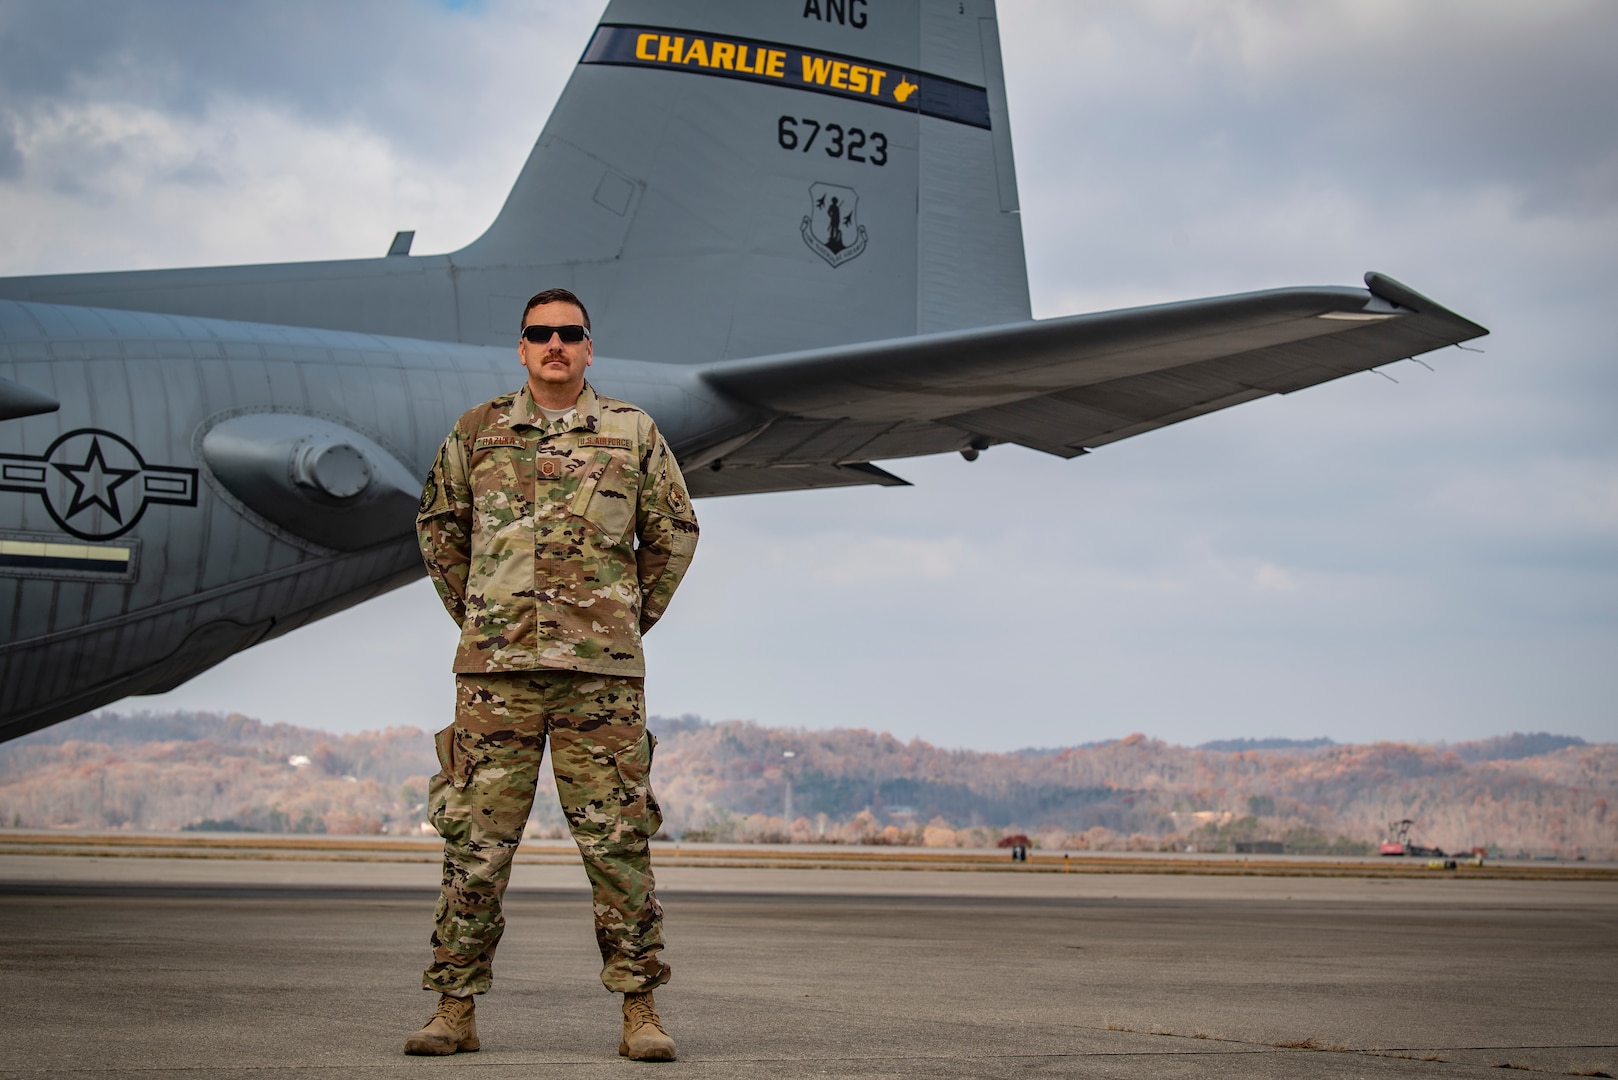 Master Sgt. Darrin Hazuka, a crew chief assigned to the 130th Aircraft Maintenance Squadron, poses for a portrait in front of a C-130H at McLaughlin Air National Guard Base, Charleston, W.Va. (U.S. Air National Guard Photo by Senior Airman Caleb Vance)